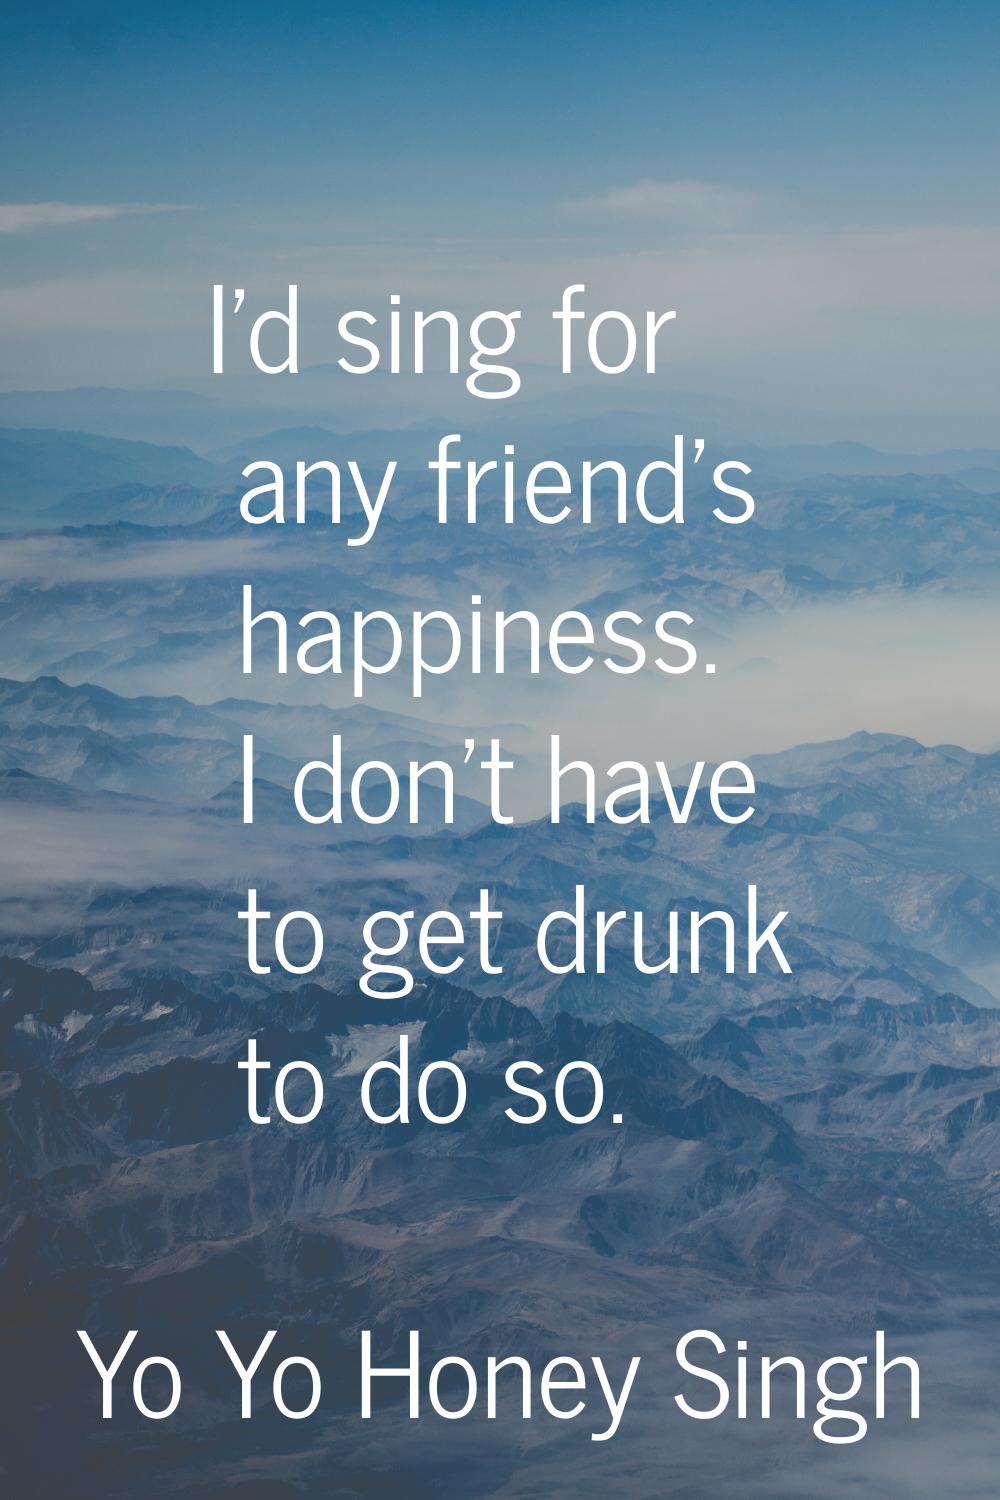 I'd sing for any friend's happiness. I don't have to get drunk to do so.